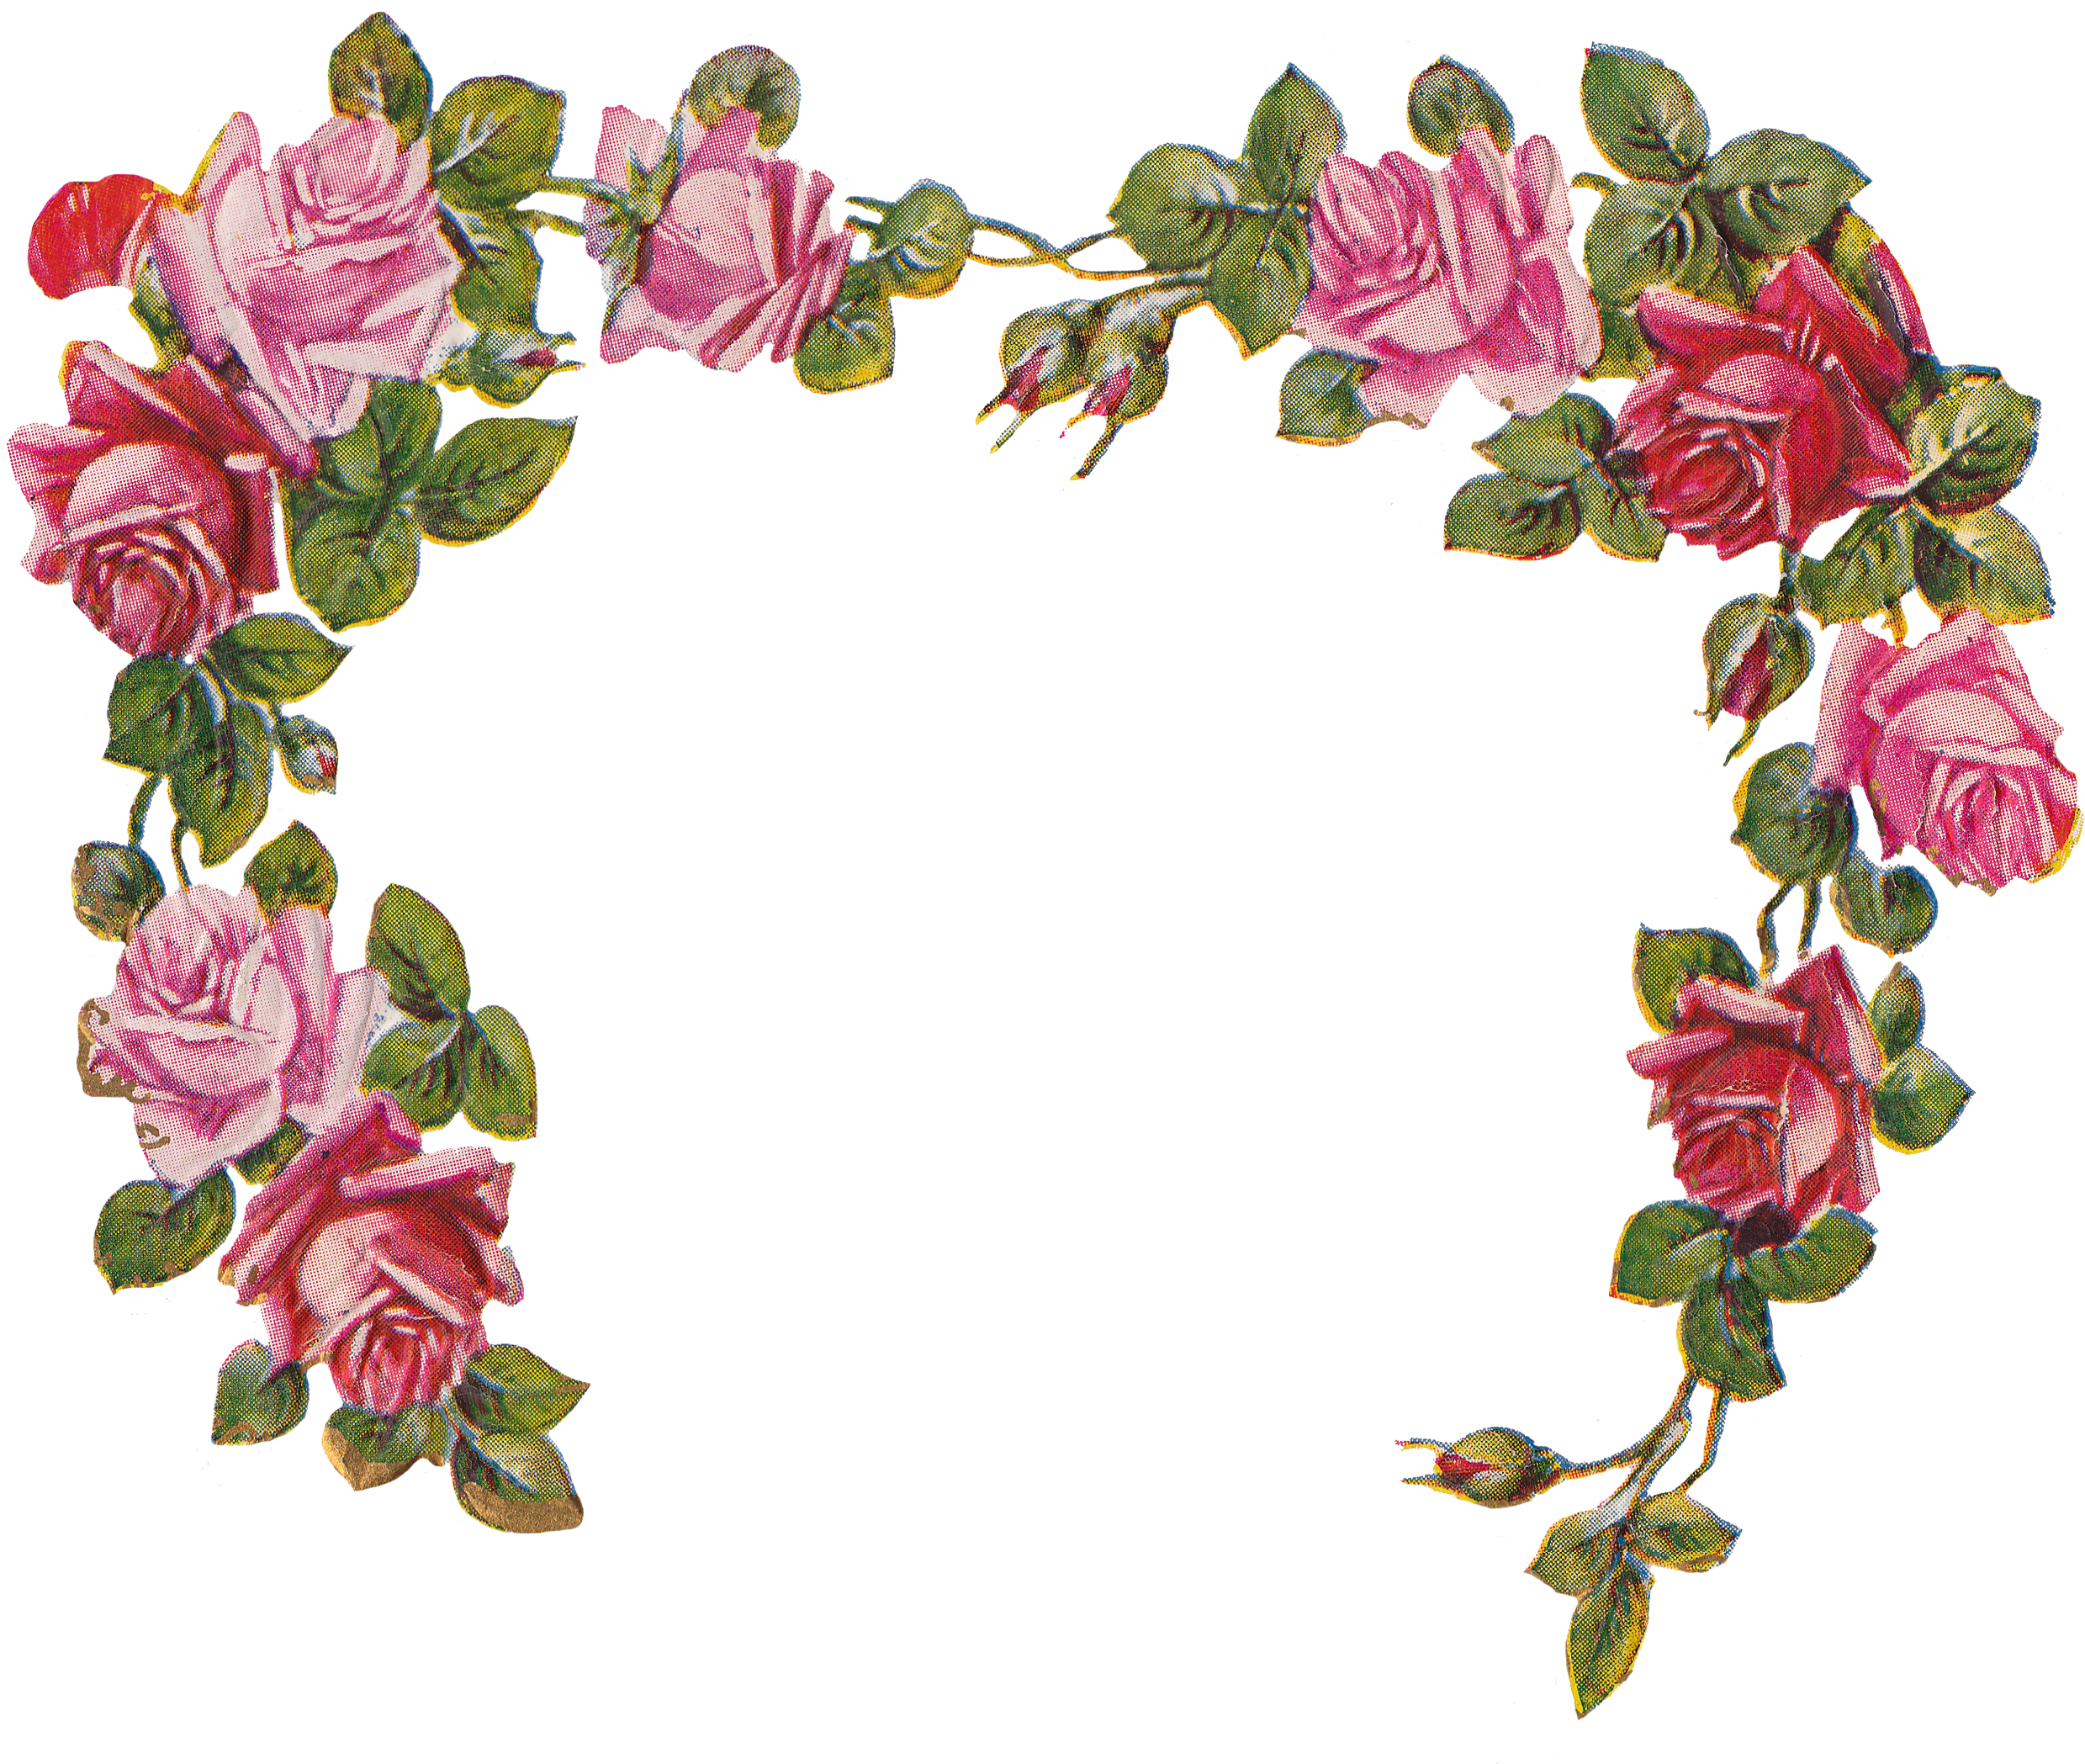 Here Is The Image Decomposed For You To Use The Elements - Flower Frame Without Background (2488x2103)